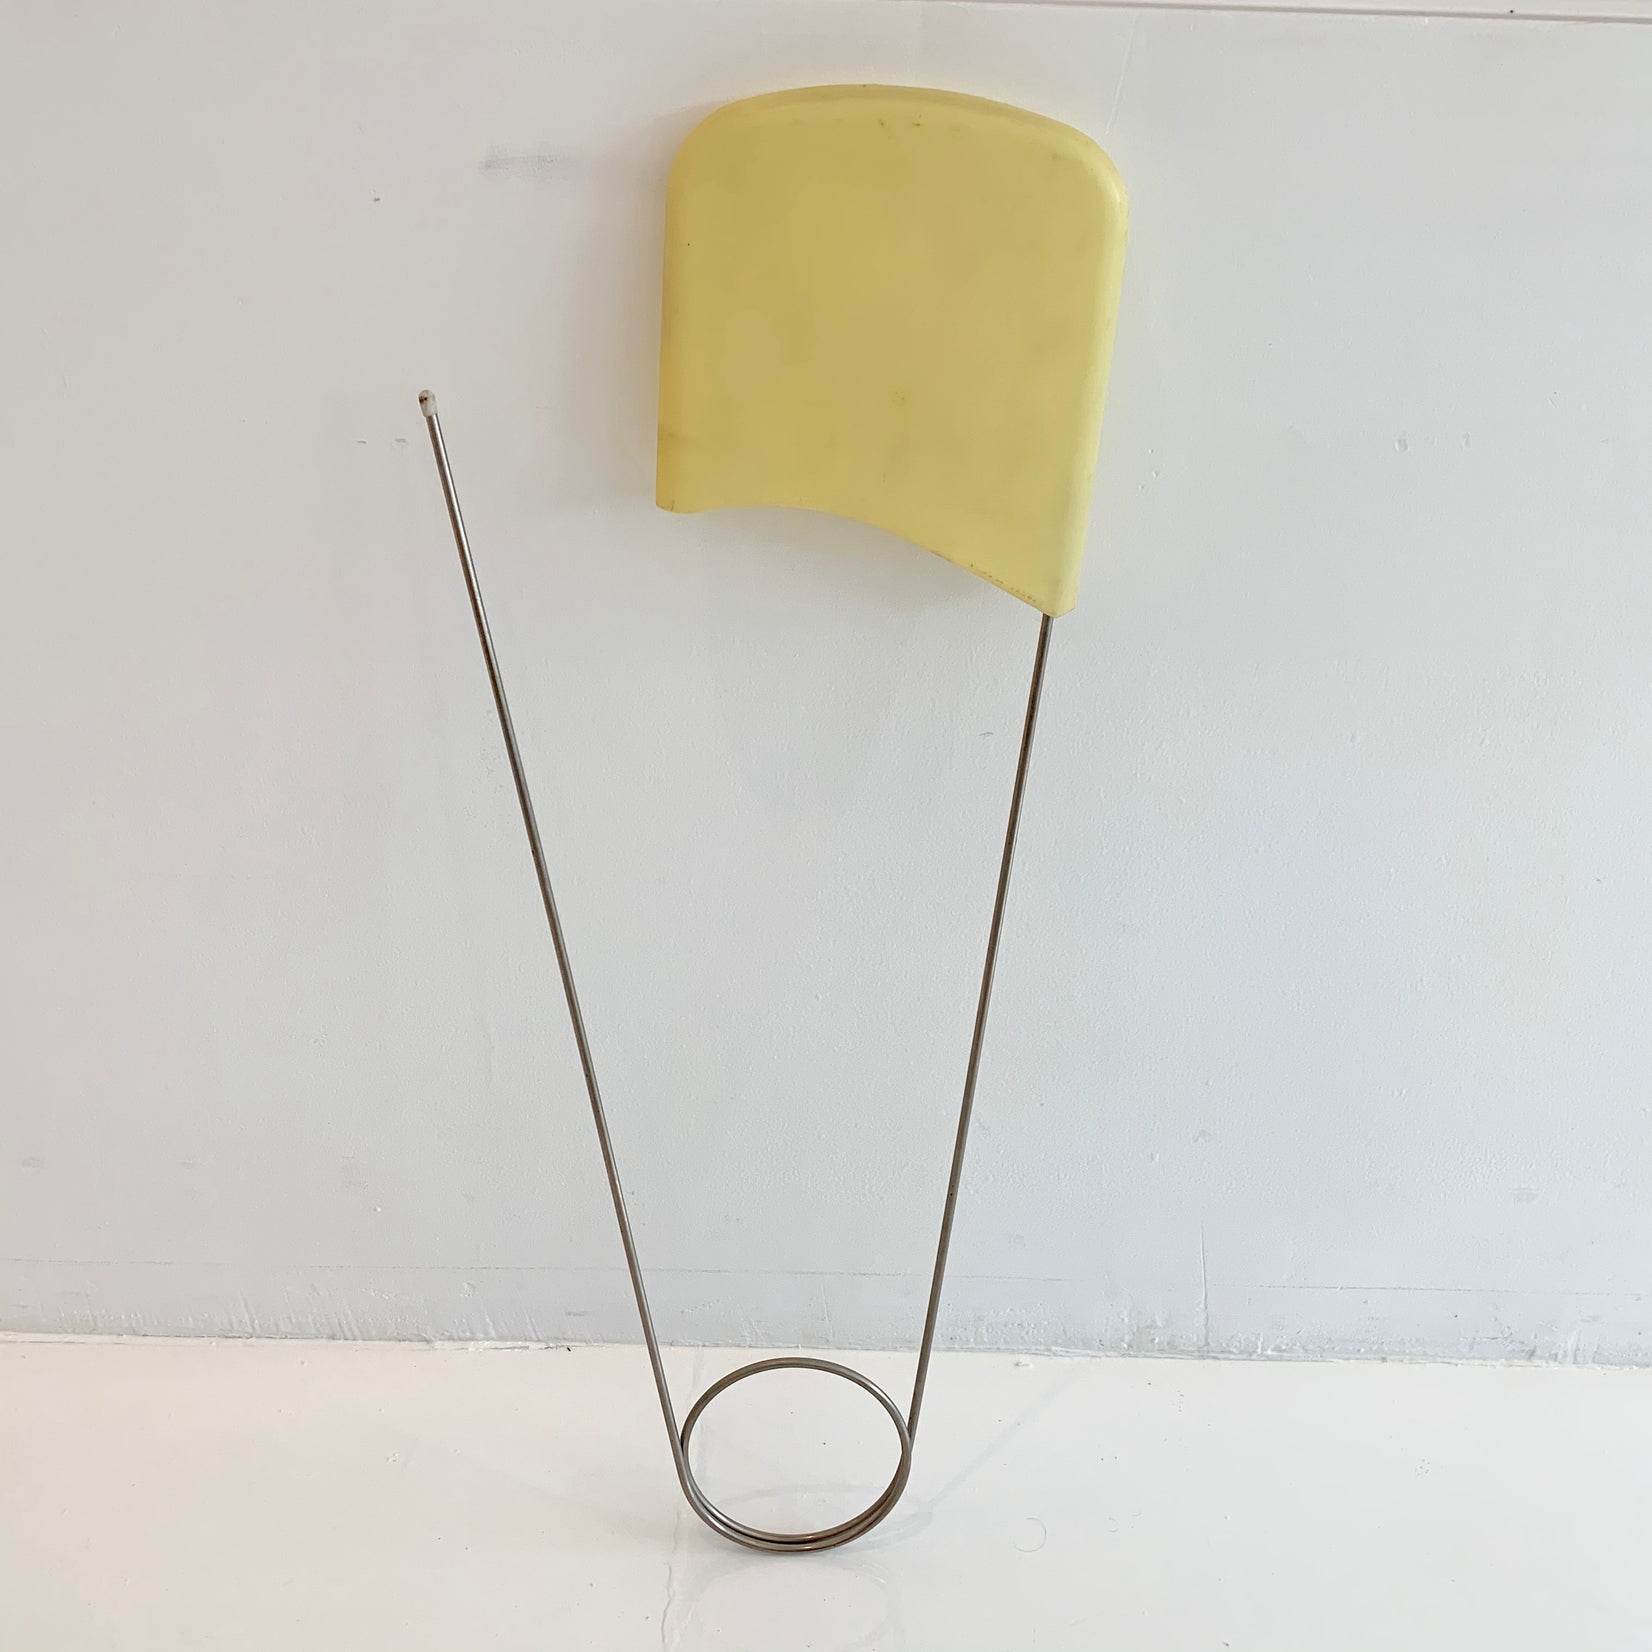 Monumental 3 Foot Tall Safety Pin by Think Big NYC